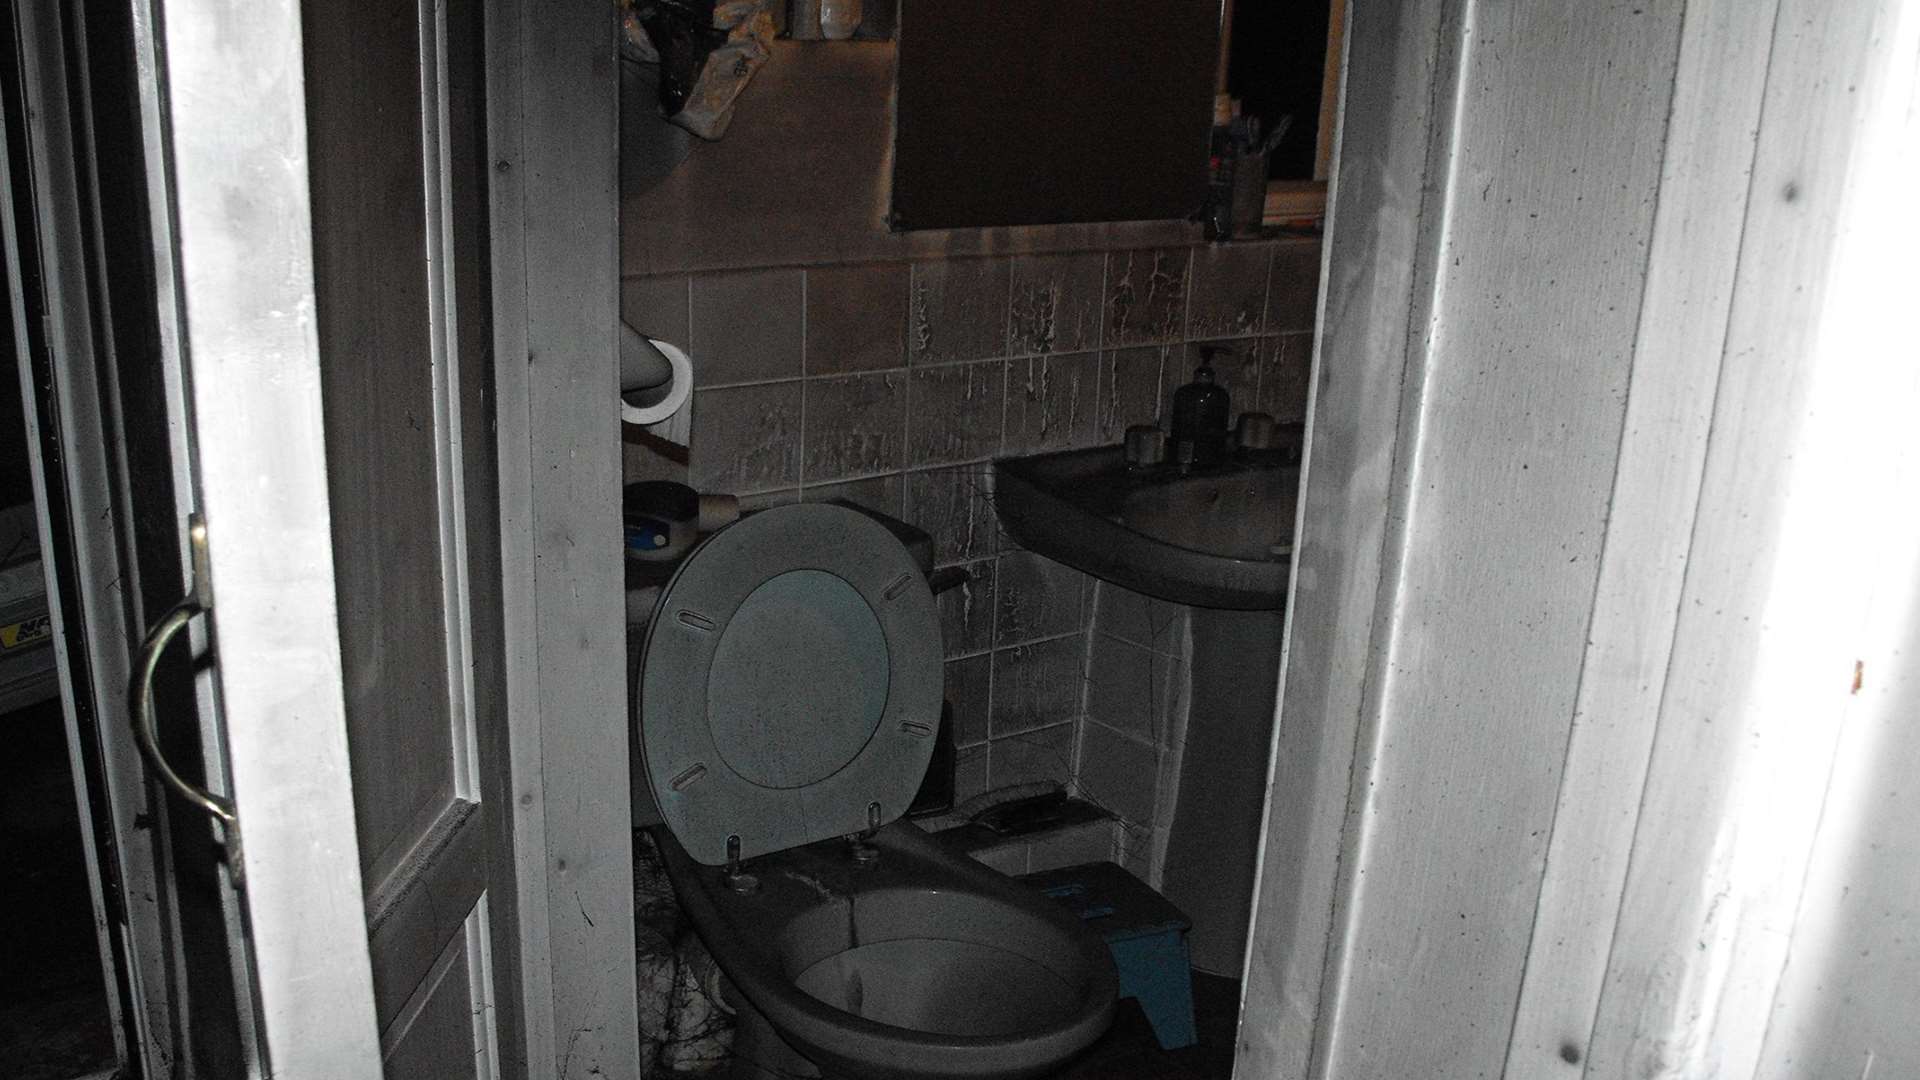 The toilet area was also smoke-damaged